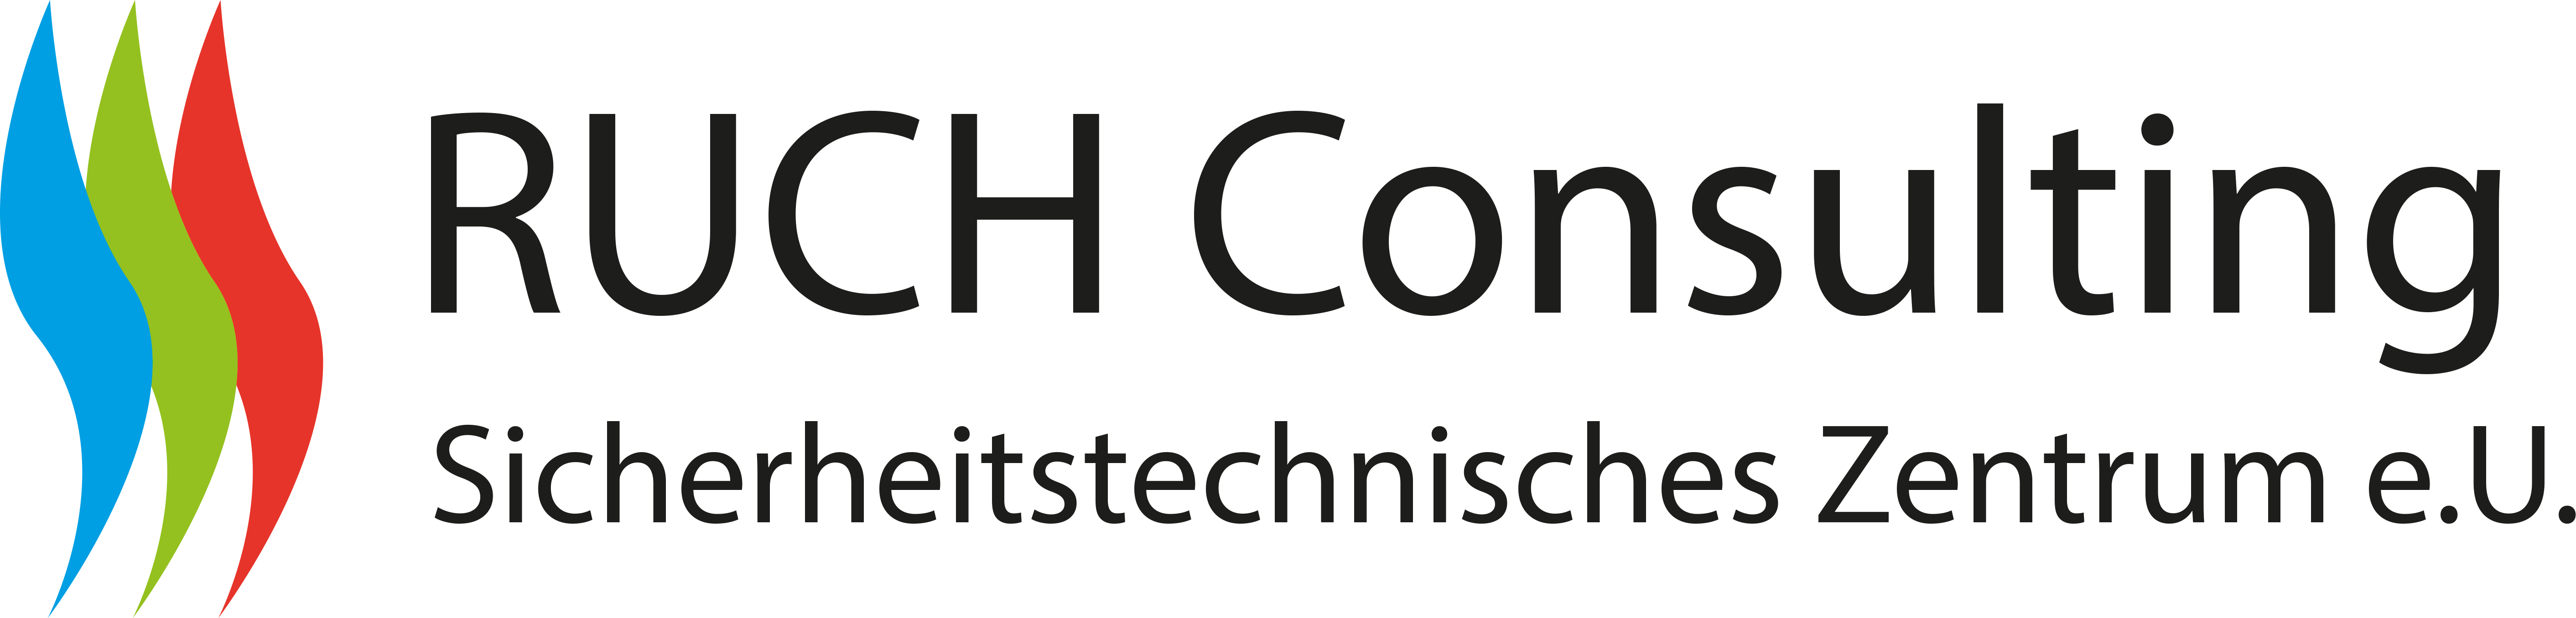 RUCH Consulting